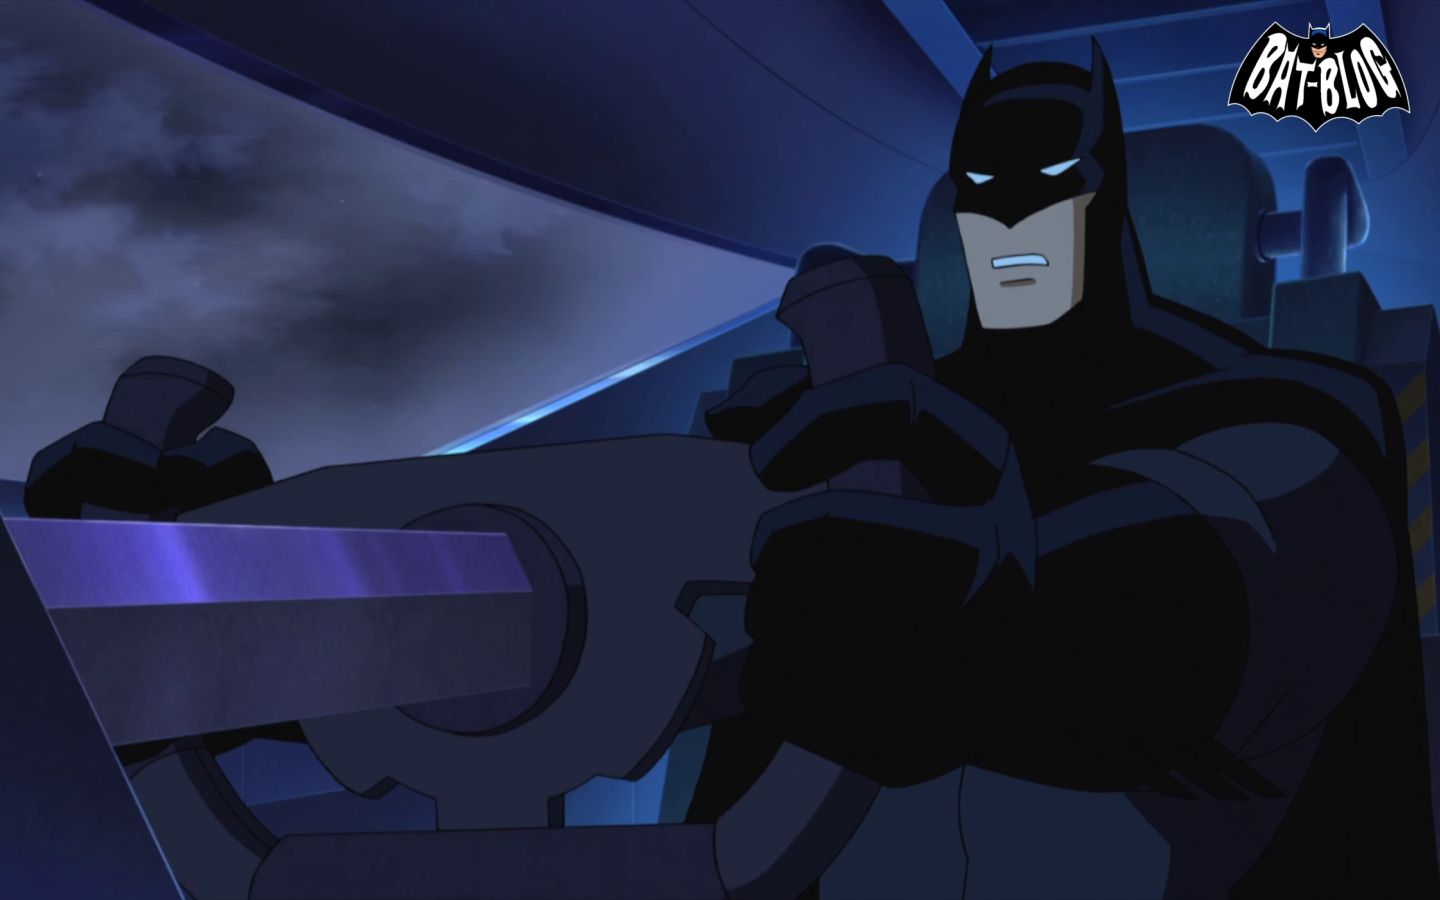 BAT, BATMAN TOYS and COLLECTIBLES: JUSTICE LEAGUE DOOM DVD Wallpaper Wednesday!